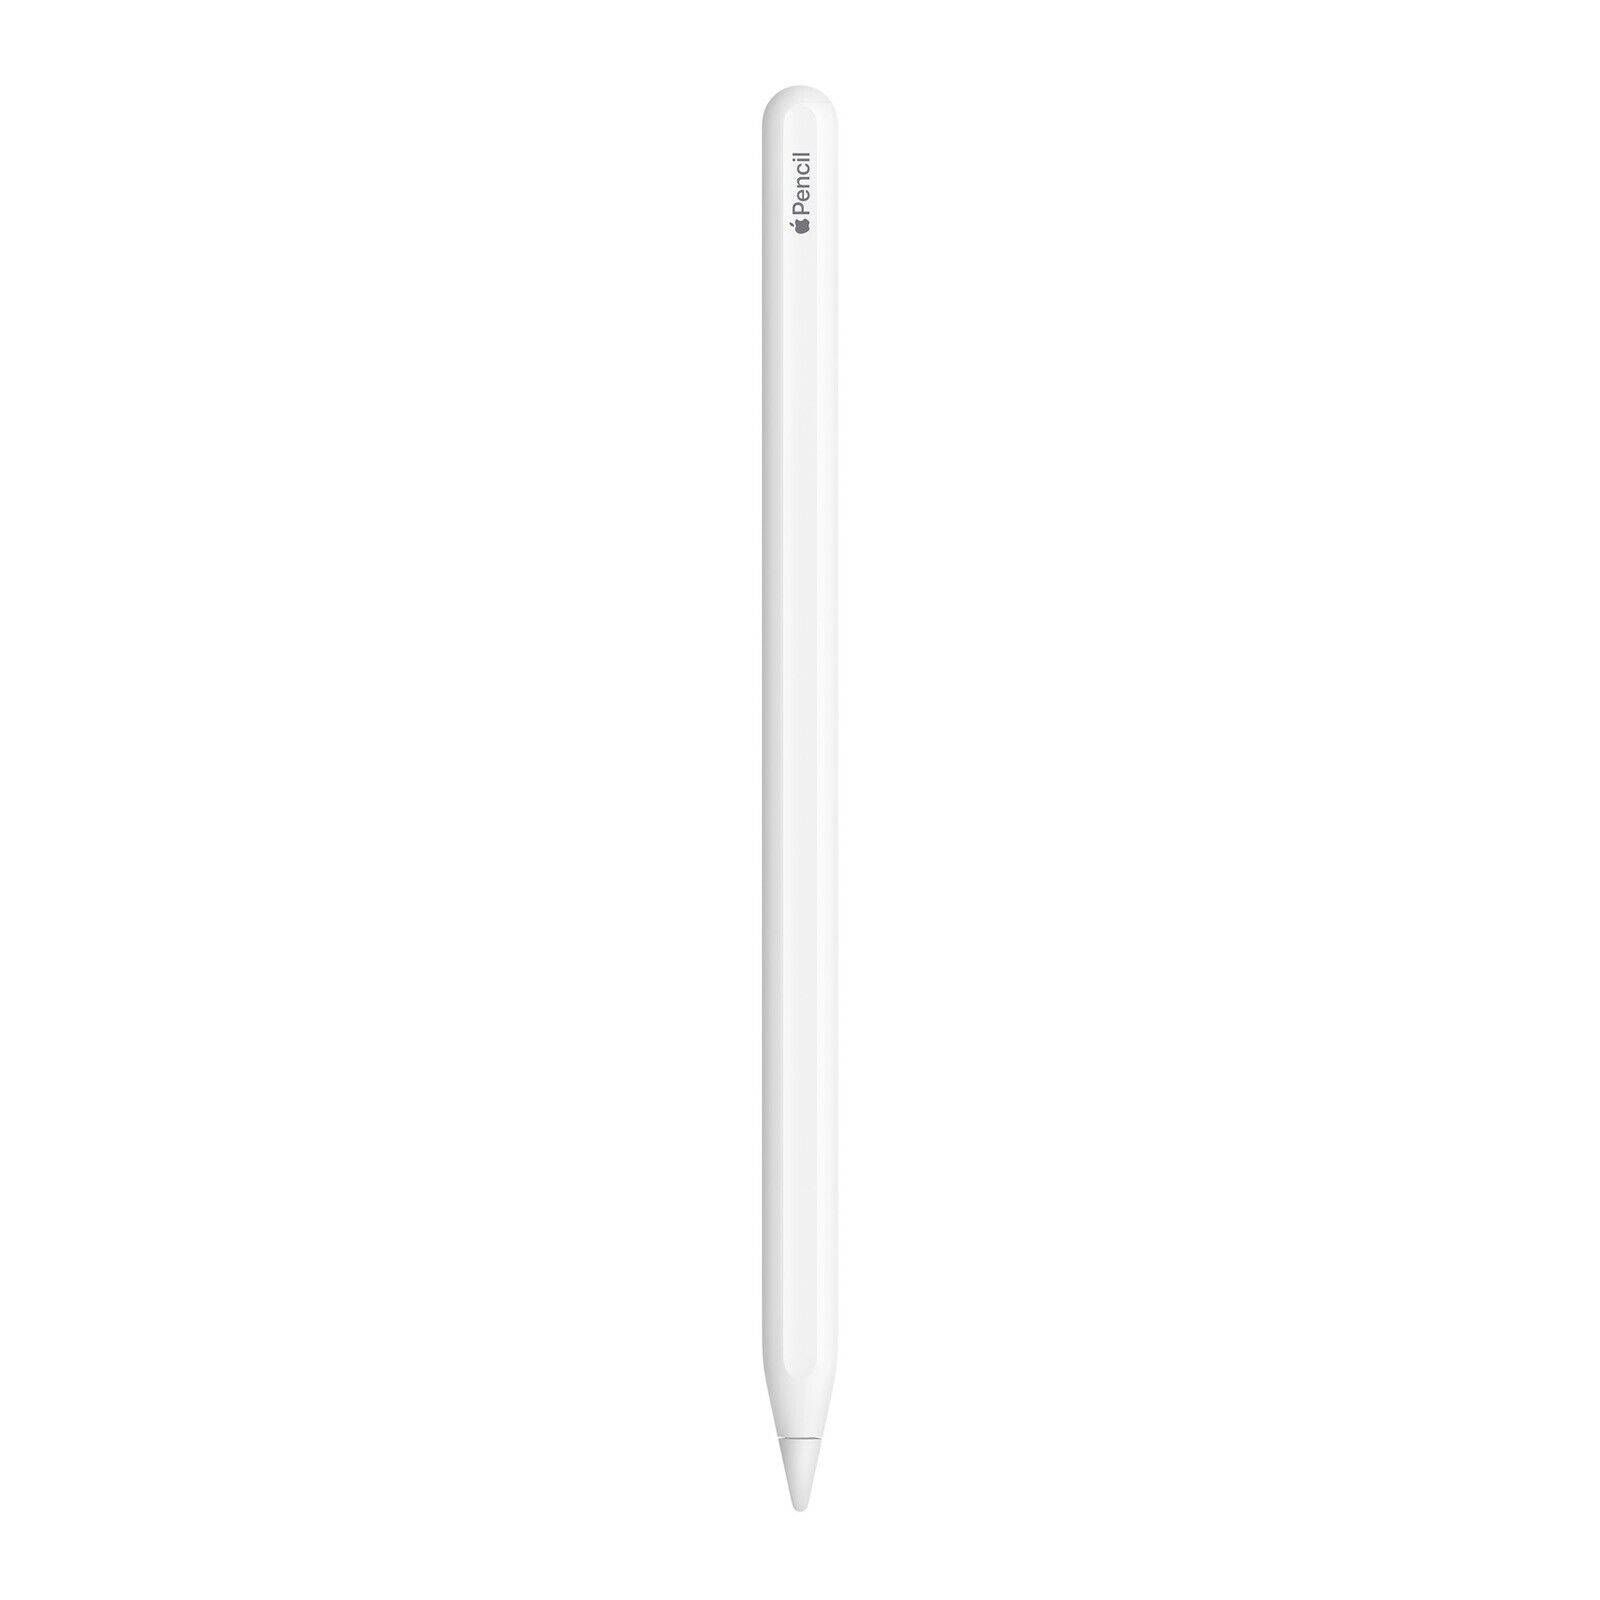 Best Deal Brand New Apple Pencil Stylus 2nd Generation White